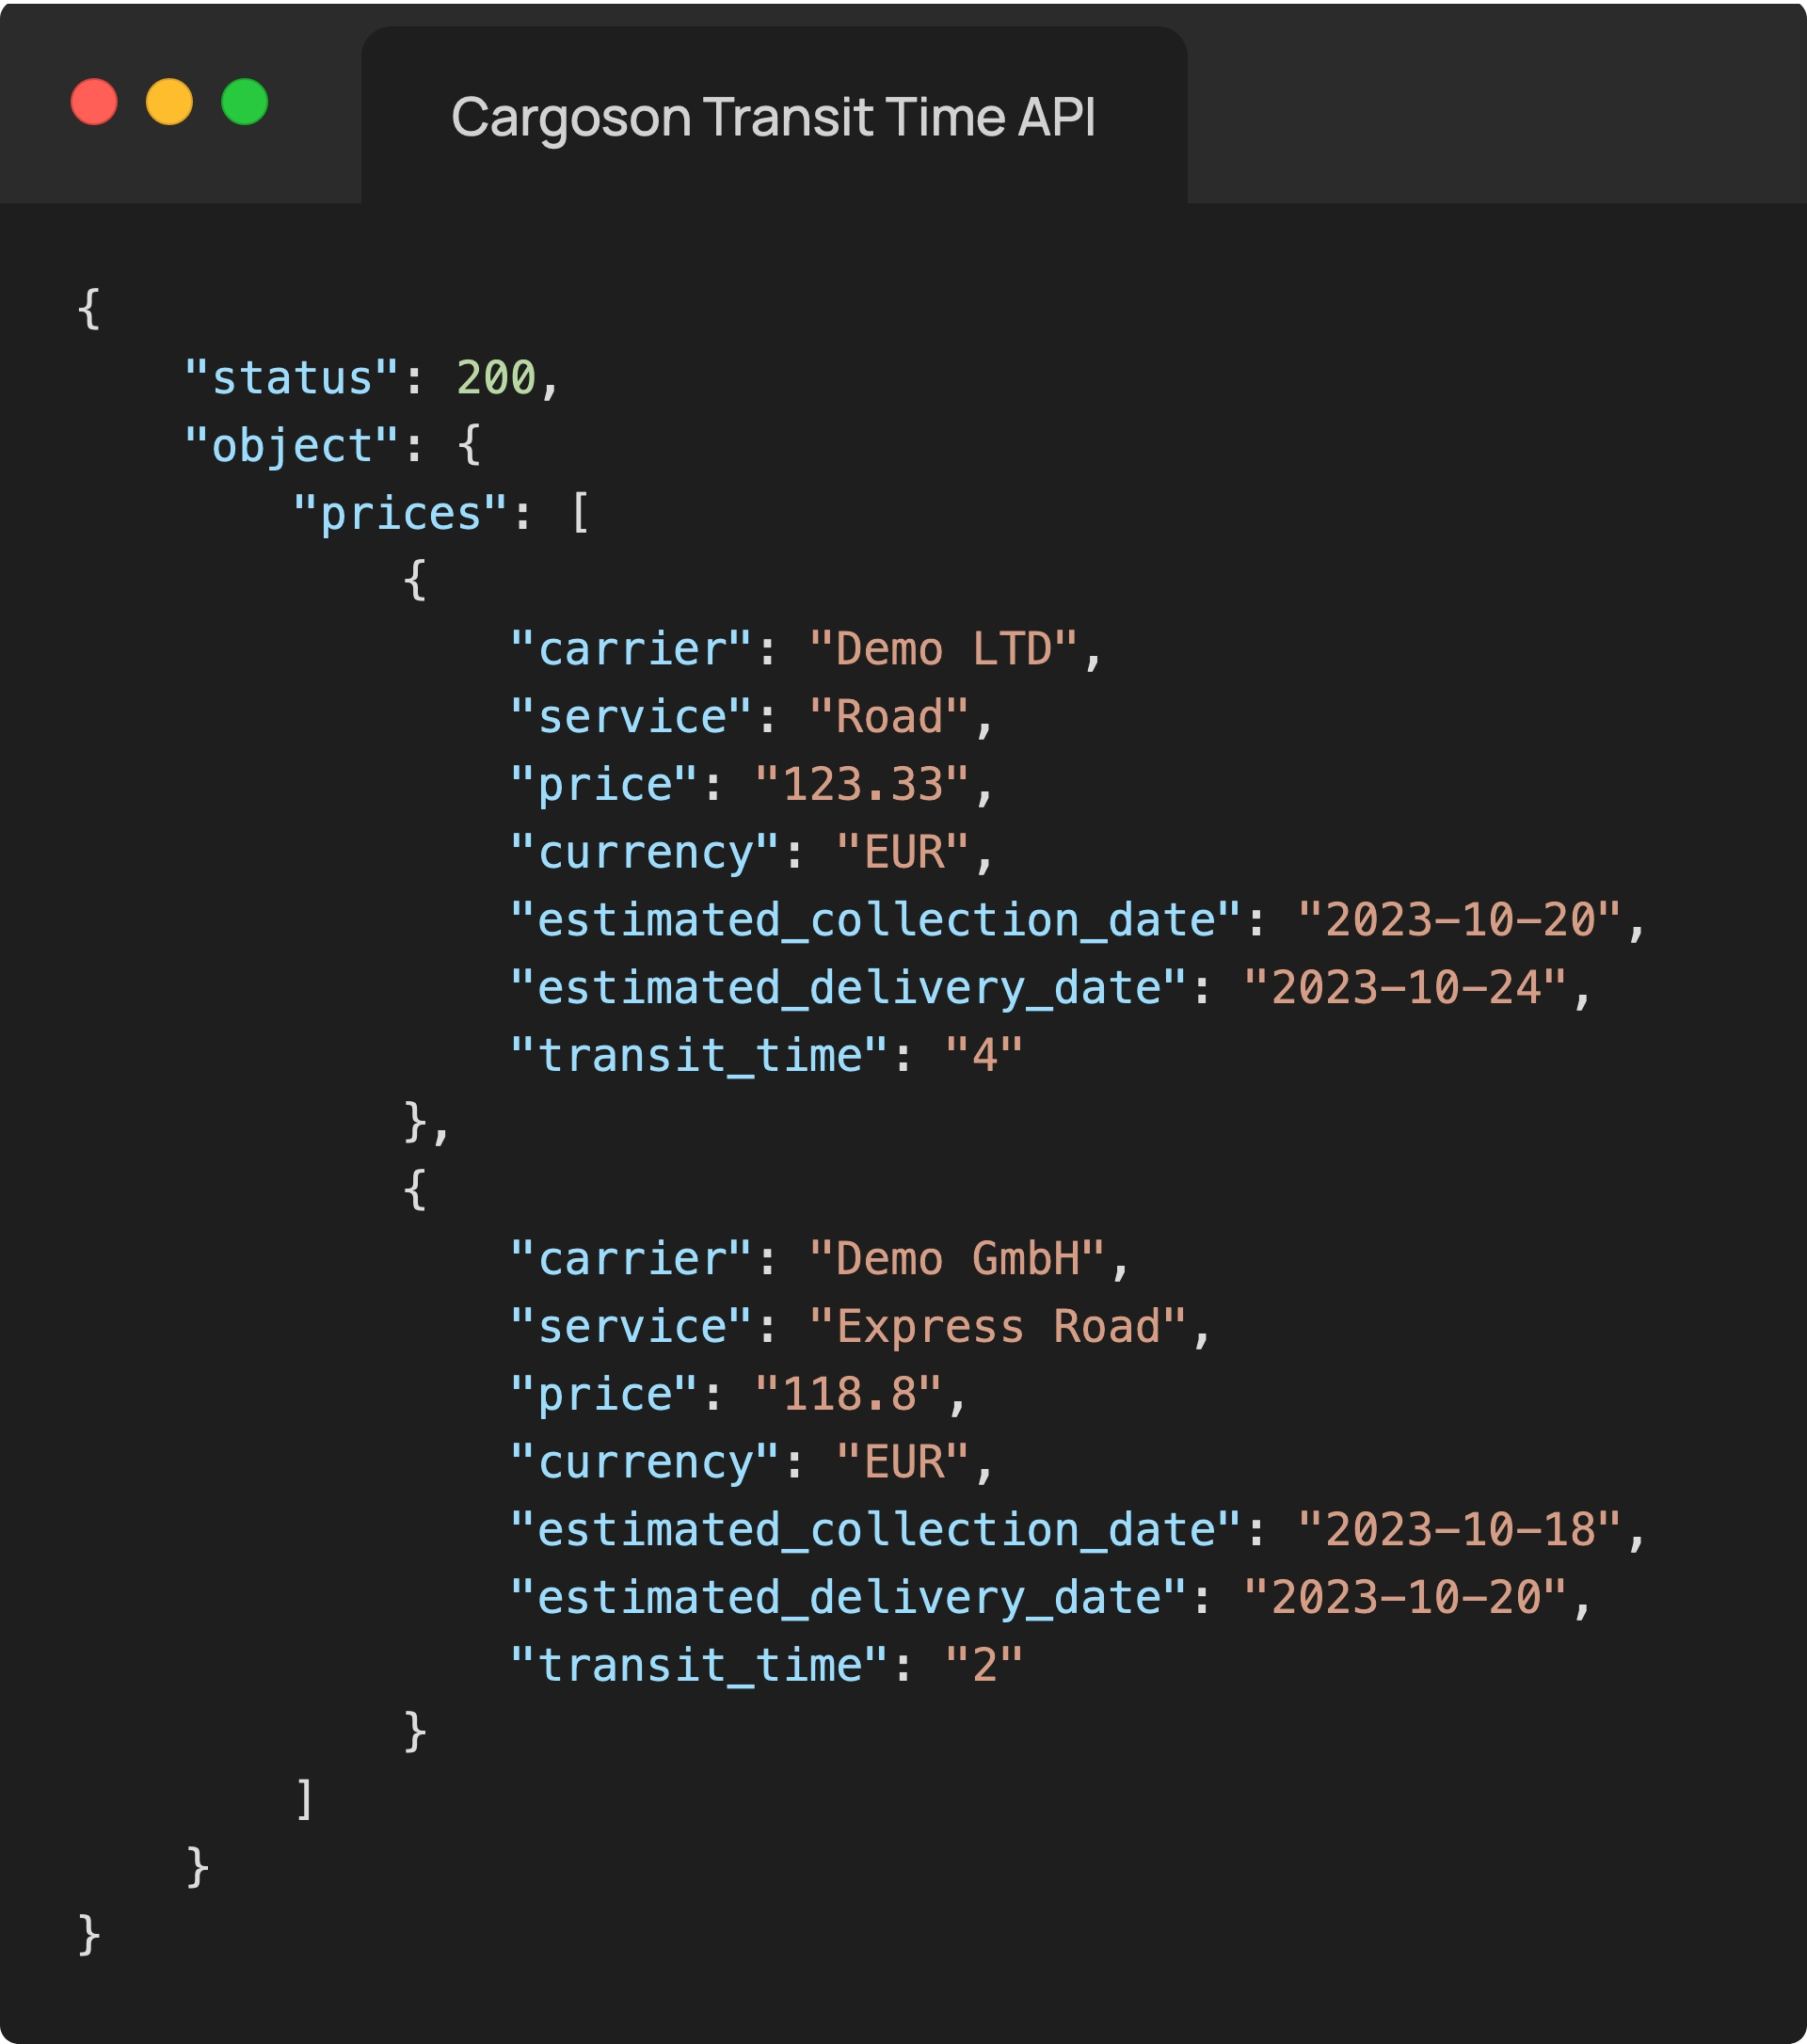 Multi-Carrier Freight Transit Time API by Cargoson